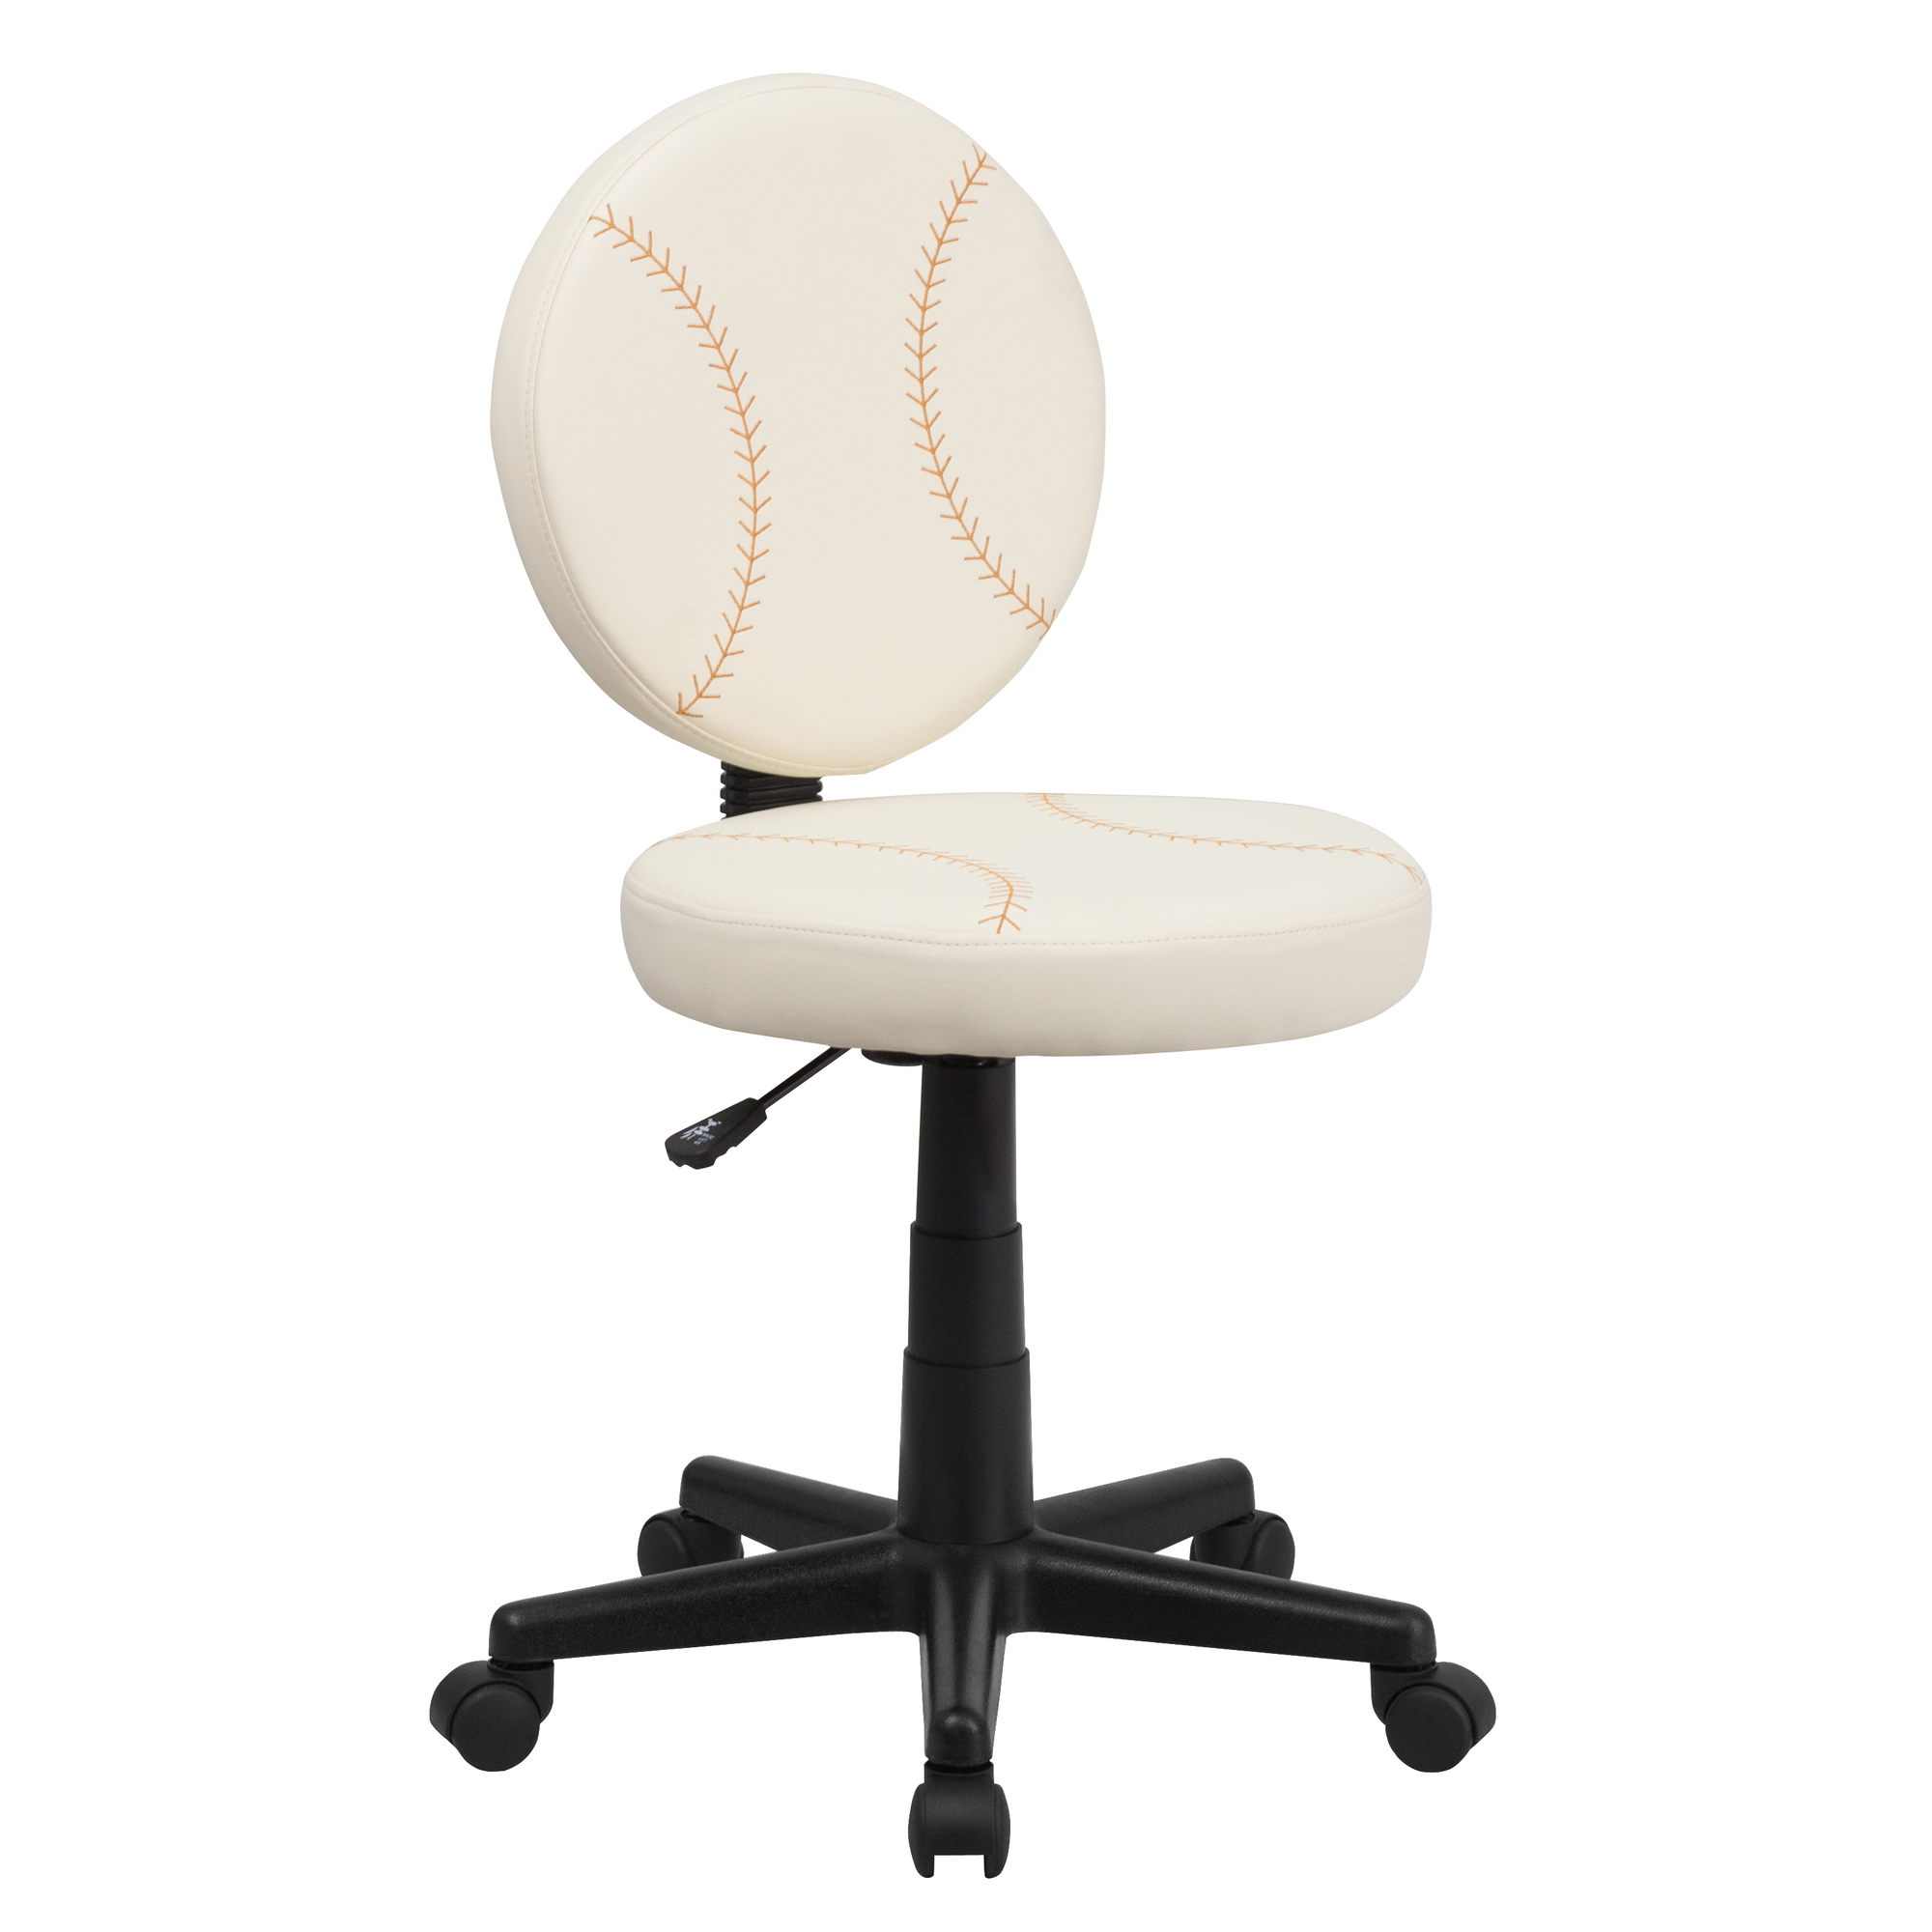 Flash Furniture, Baseball Vinyl Upholstered Swivel Task Chair, Primary Color Off White, Included (qty.) 1, Model BT6178BASE